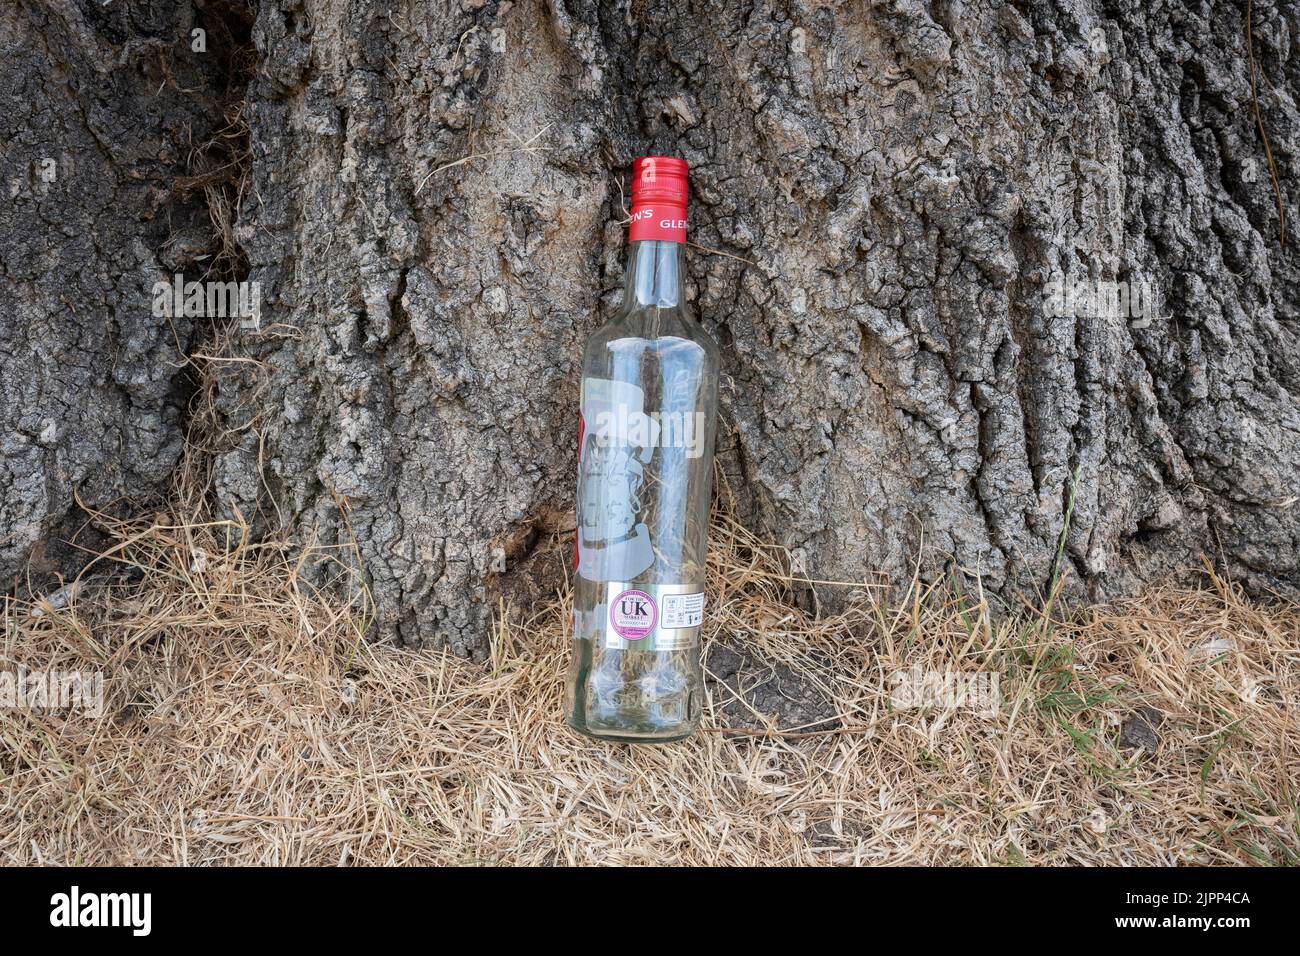 During the UK drought, a single bottle of vodka has been discarded at the foot of an ash tree after a party in Ruskin Park, south London, on 15th August 2022, in London, England. A hosepipe ban remains in place for the Thames Water area that includes London and the south-east. Stock Photo